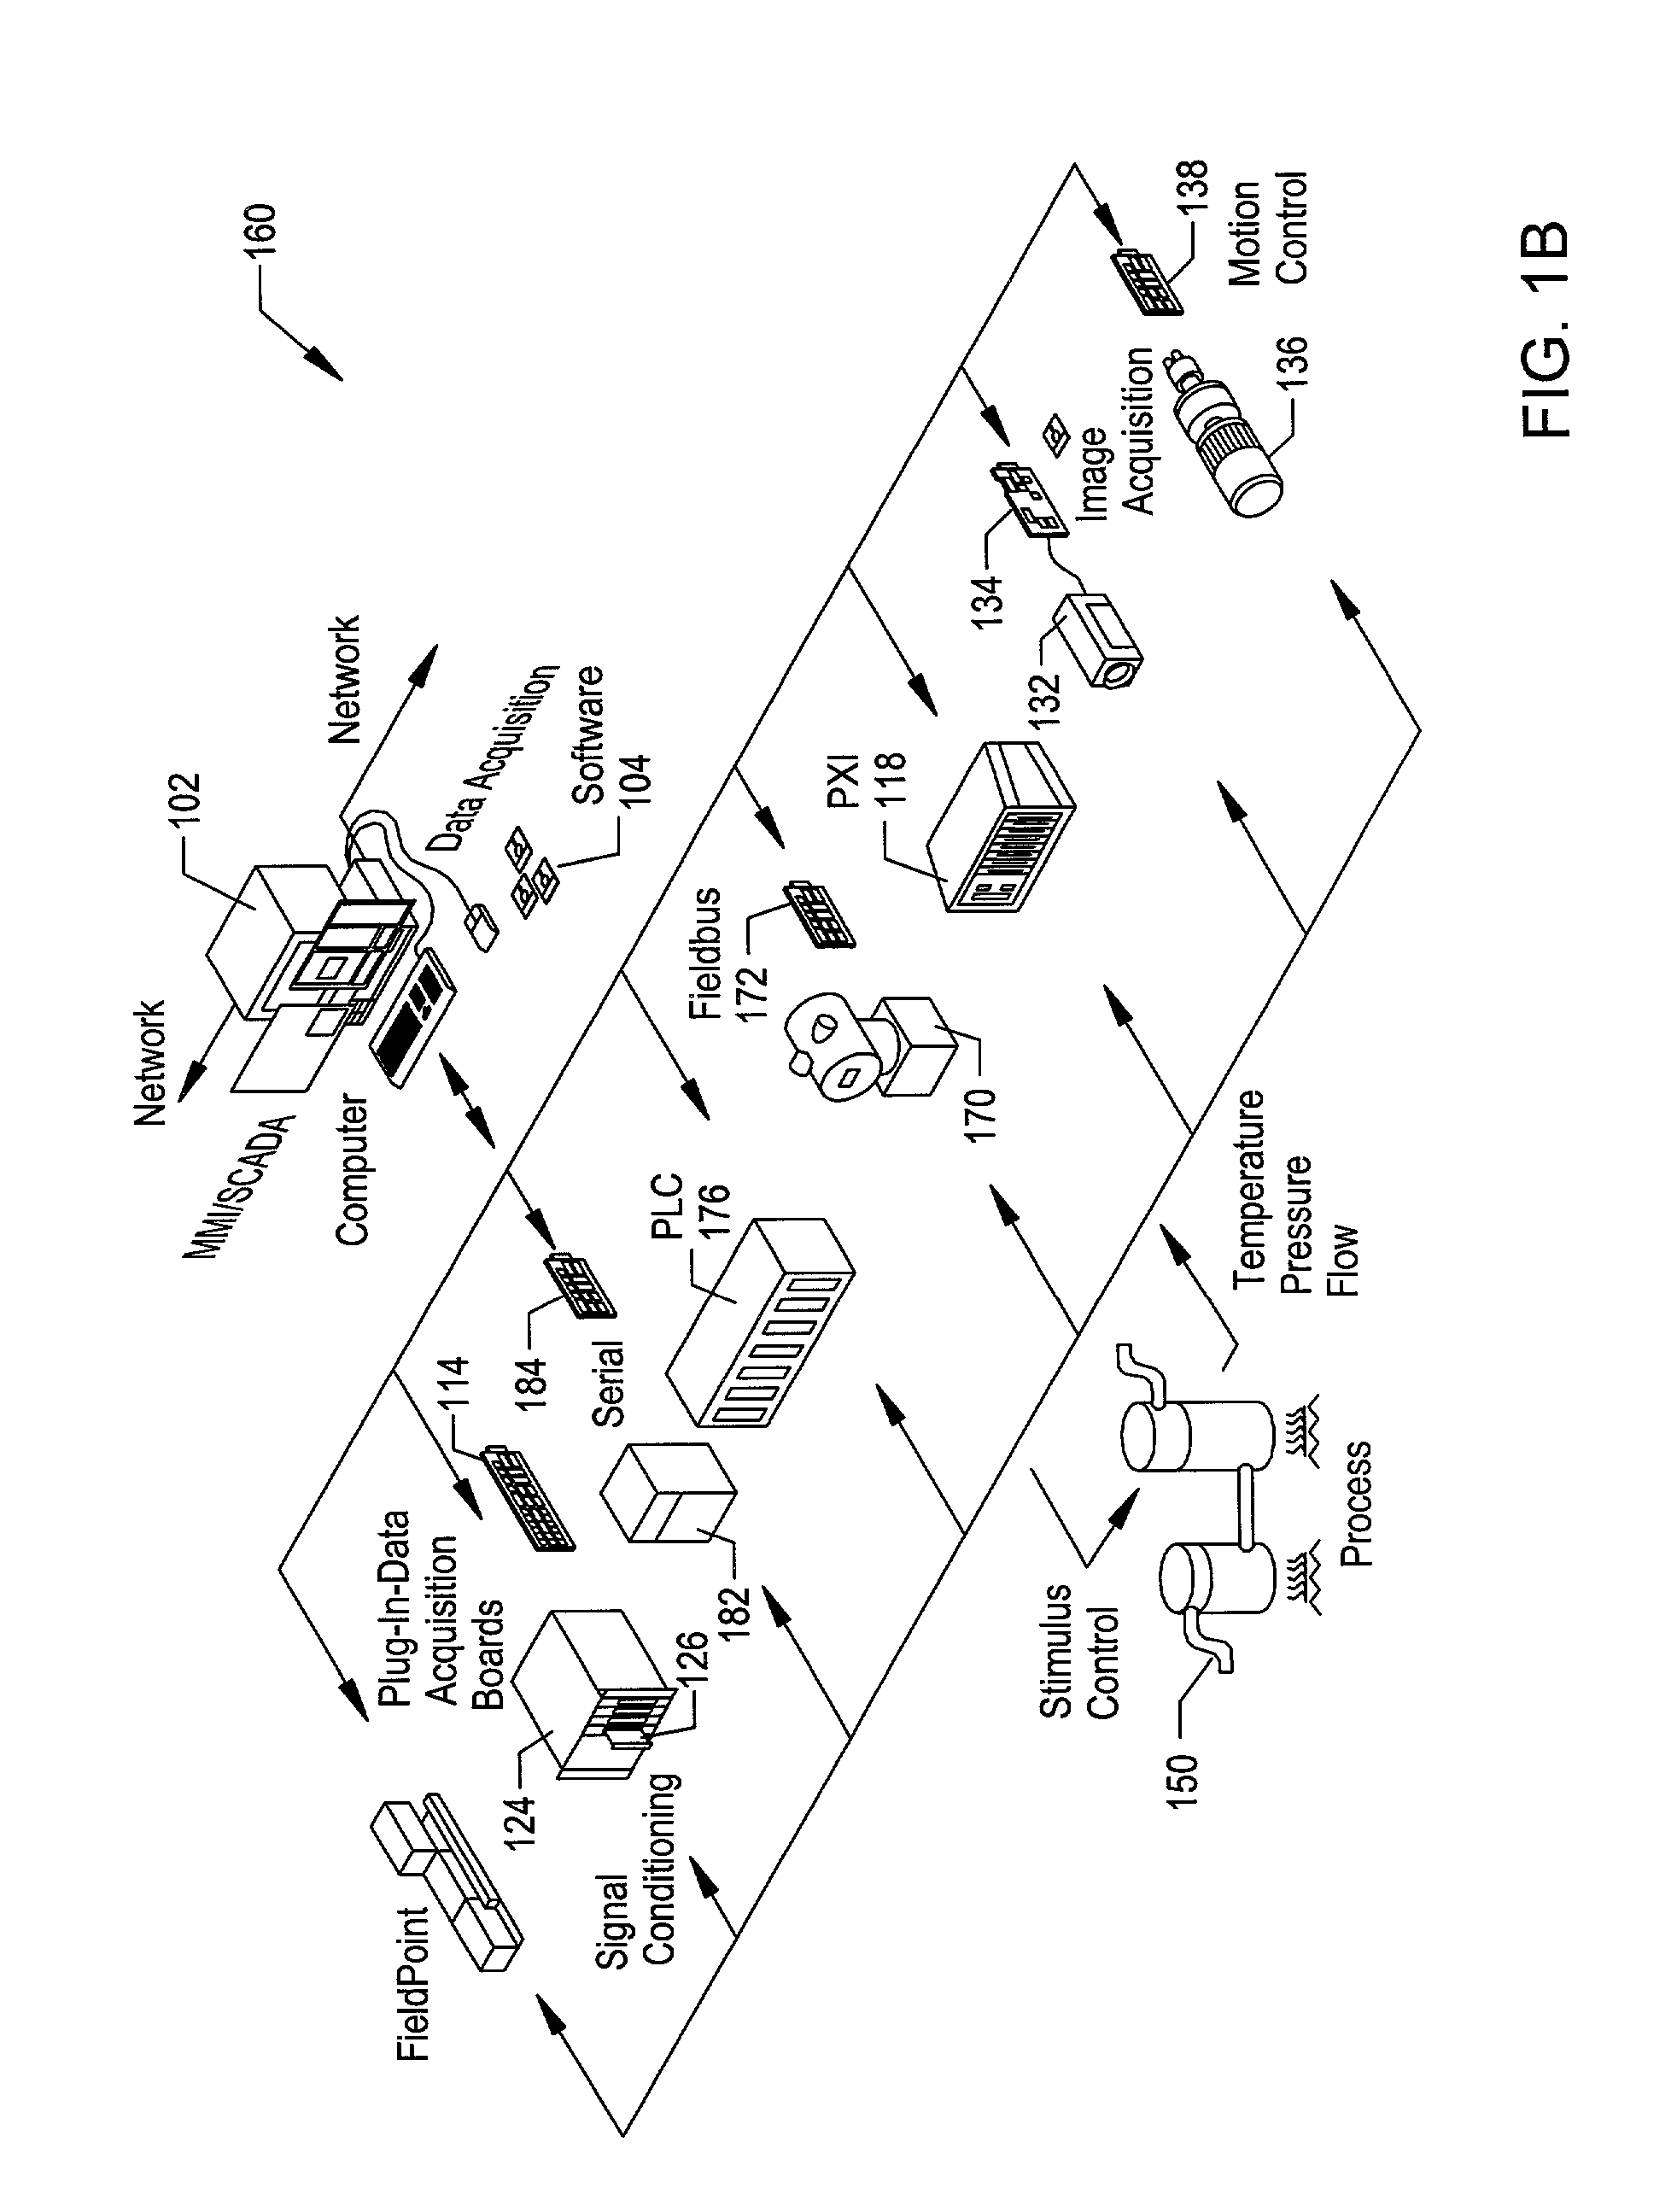 System and method for performing type checking for hardware device nodes in a graphical program